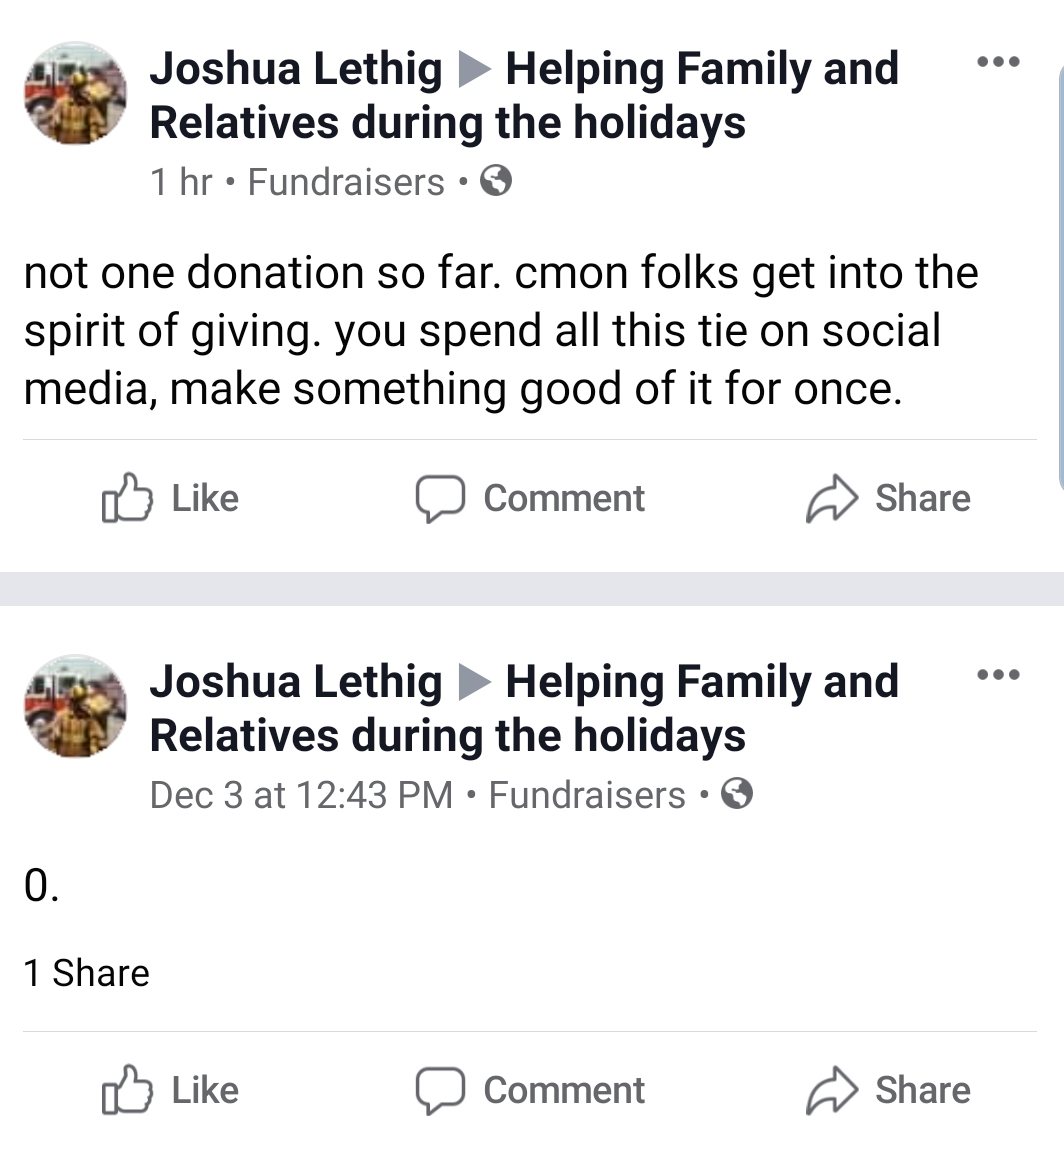 angle - Joshua Lethig Helping Family and Relatives during the holidays 1 hr Fundraisers not one donation so far. cmon folks get into the spirit of giving. you spend all this tie on social media, make something good of it for once. D Comment Joshua Lethig 